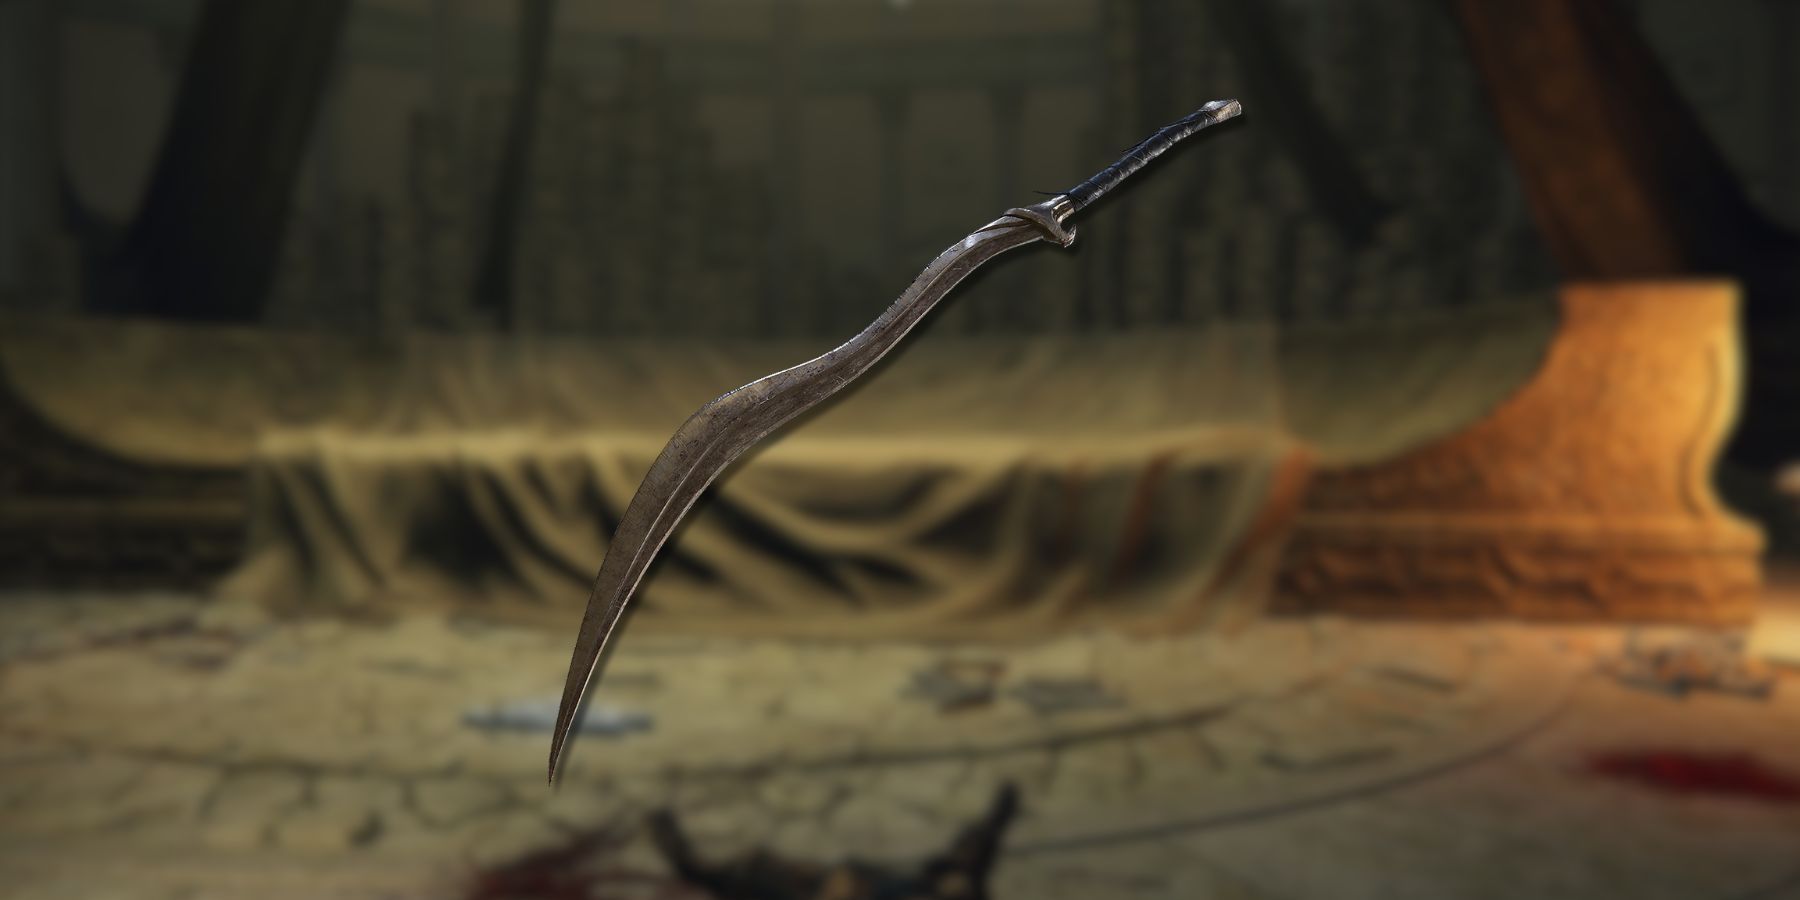 Bloodhound's Fang in Elden Ring